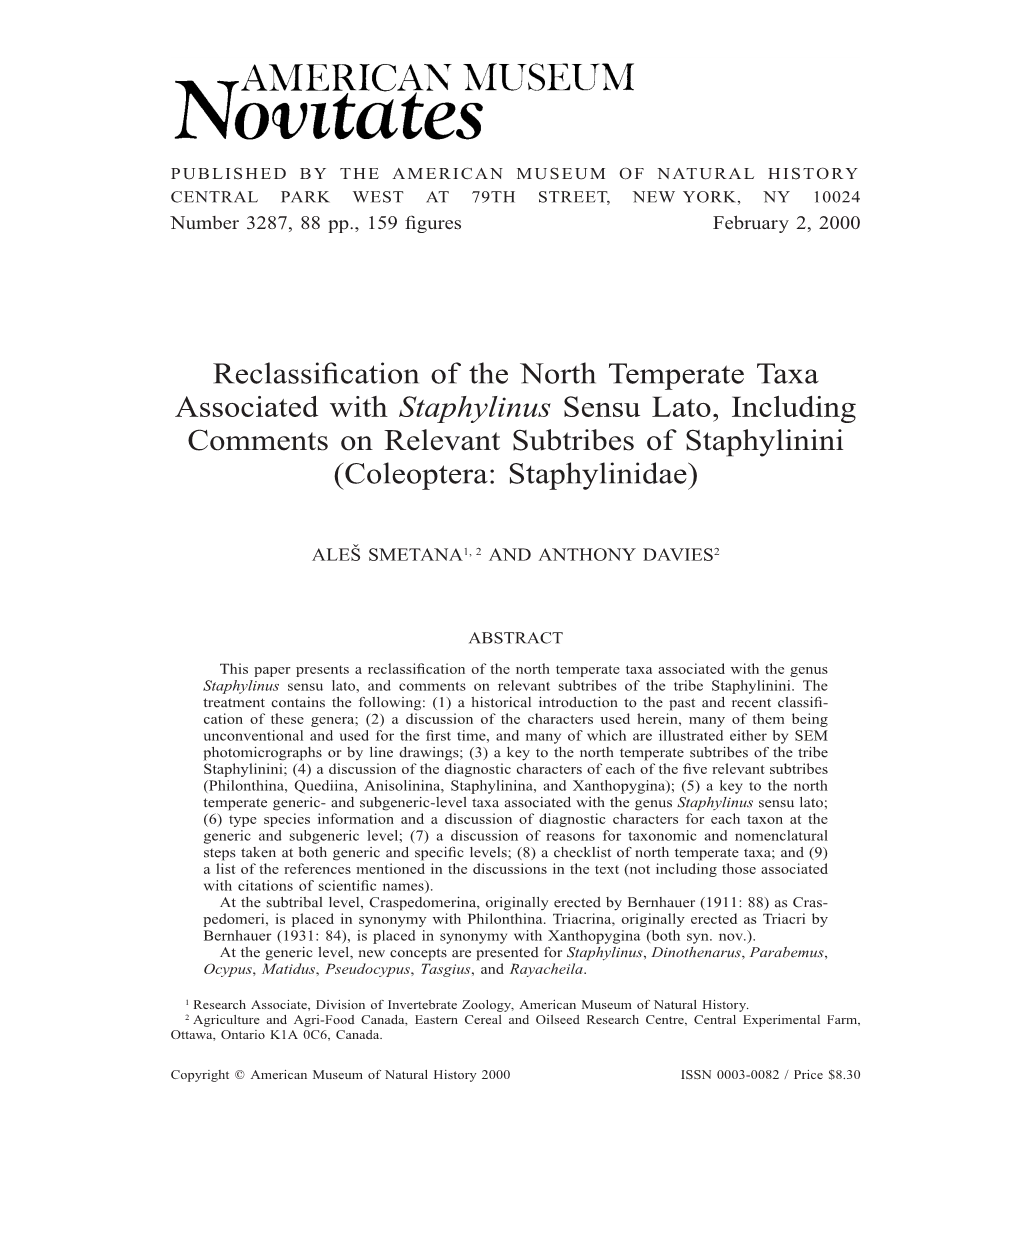 Reclassification of the North Temperate Taxa Associated with Staphylinus Sensu Lato, Including Comments on Relevant Subtribes Of